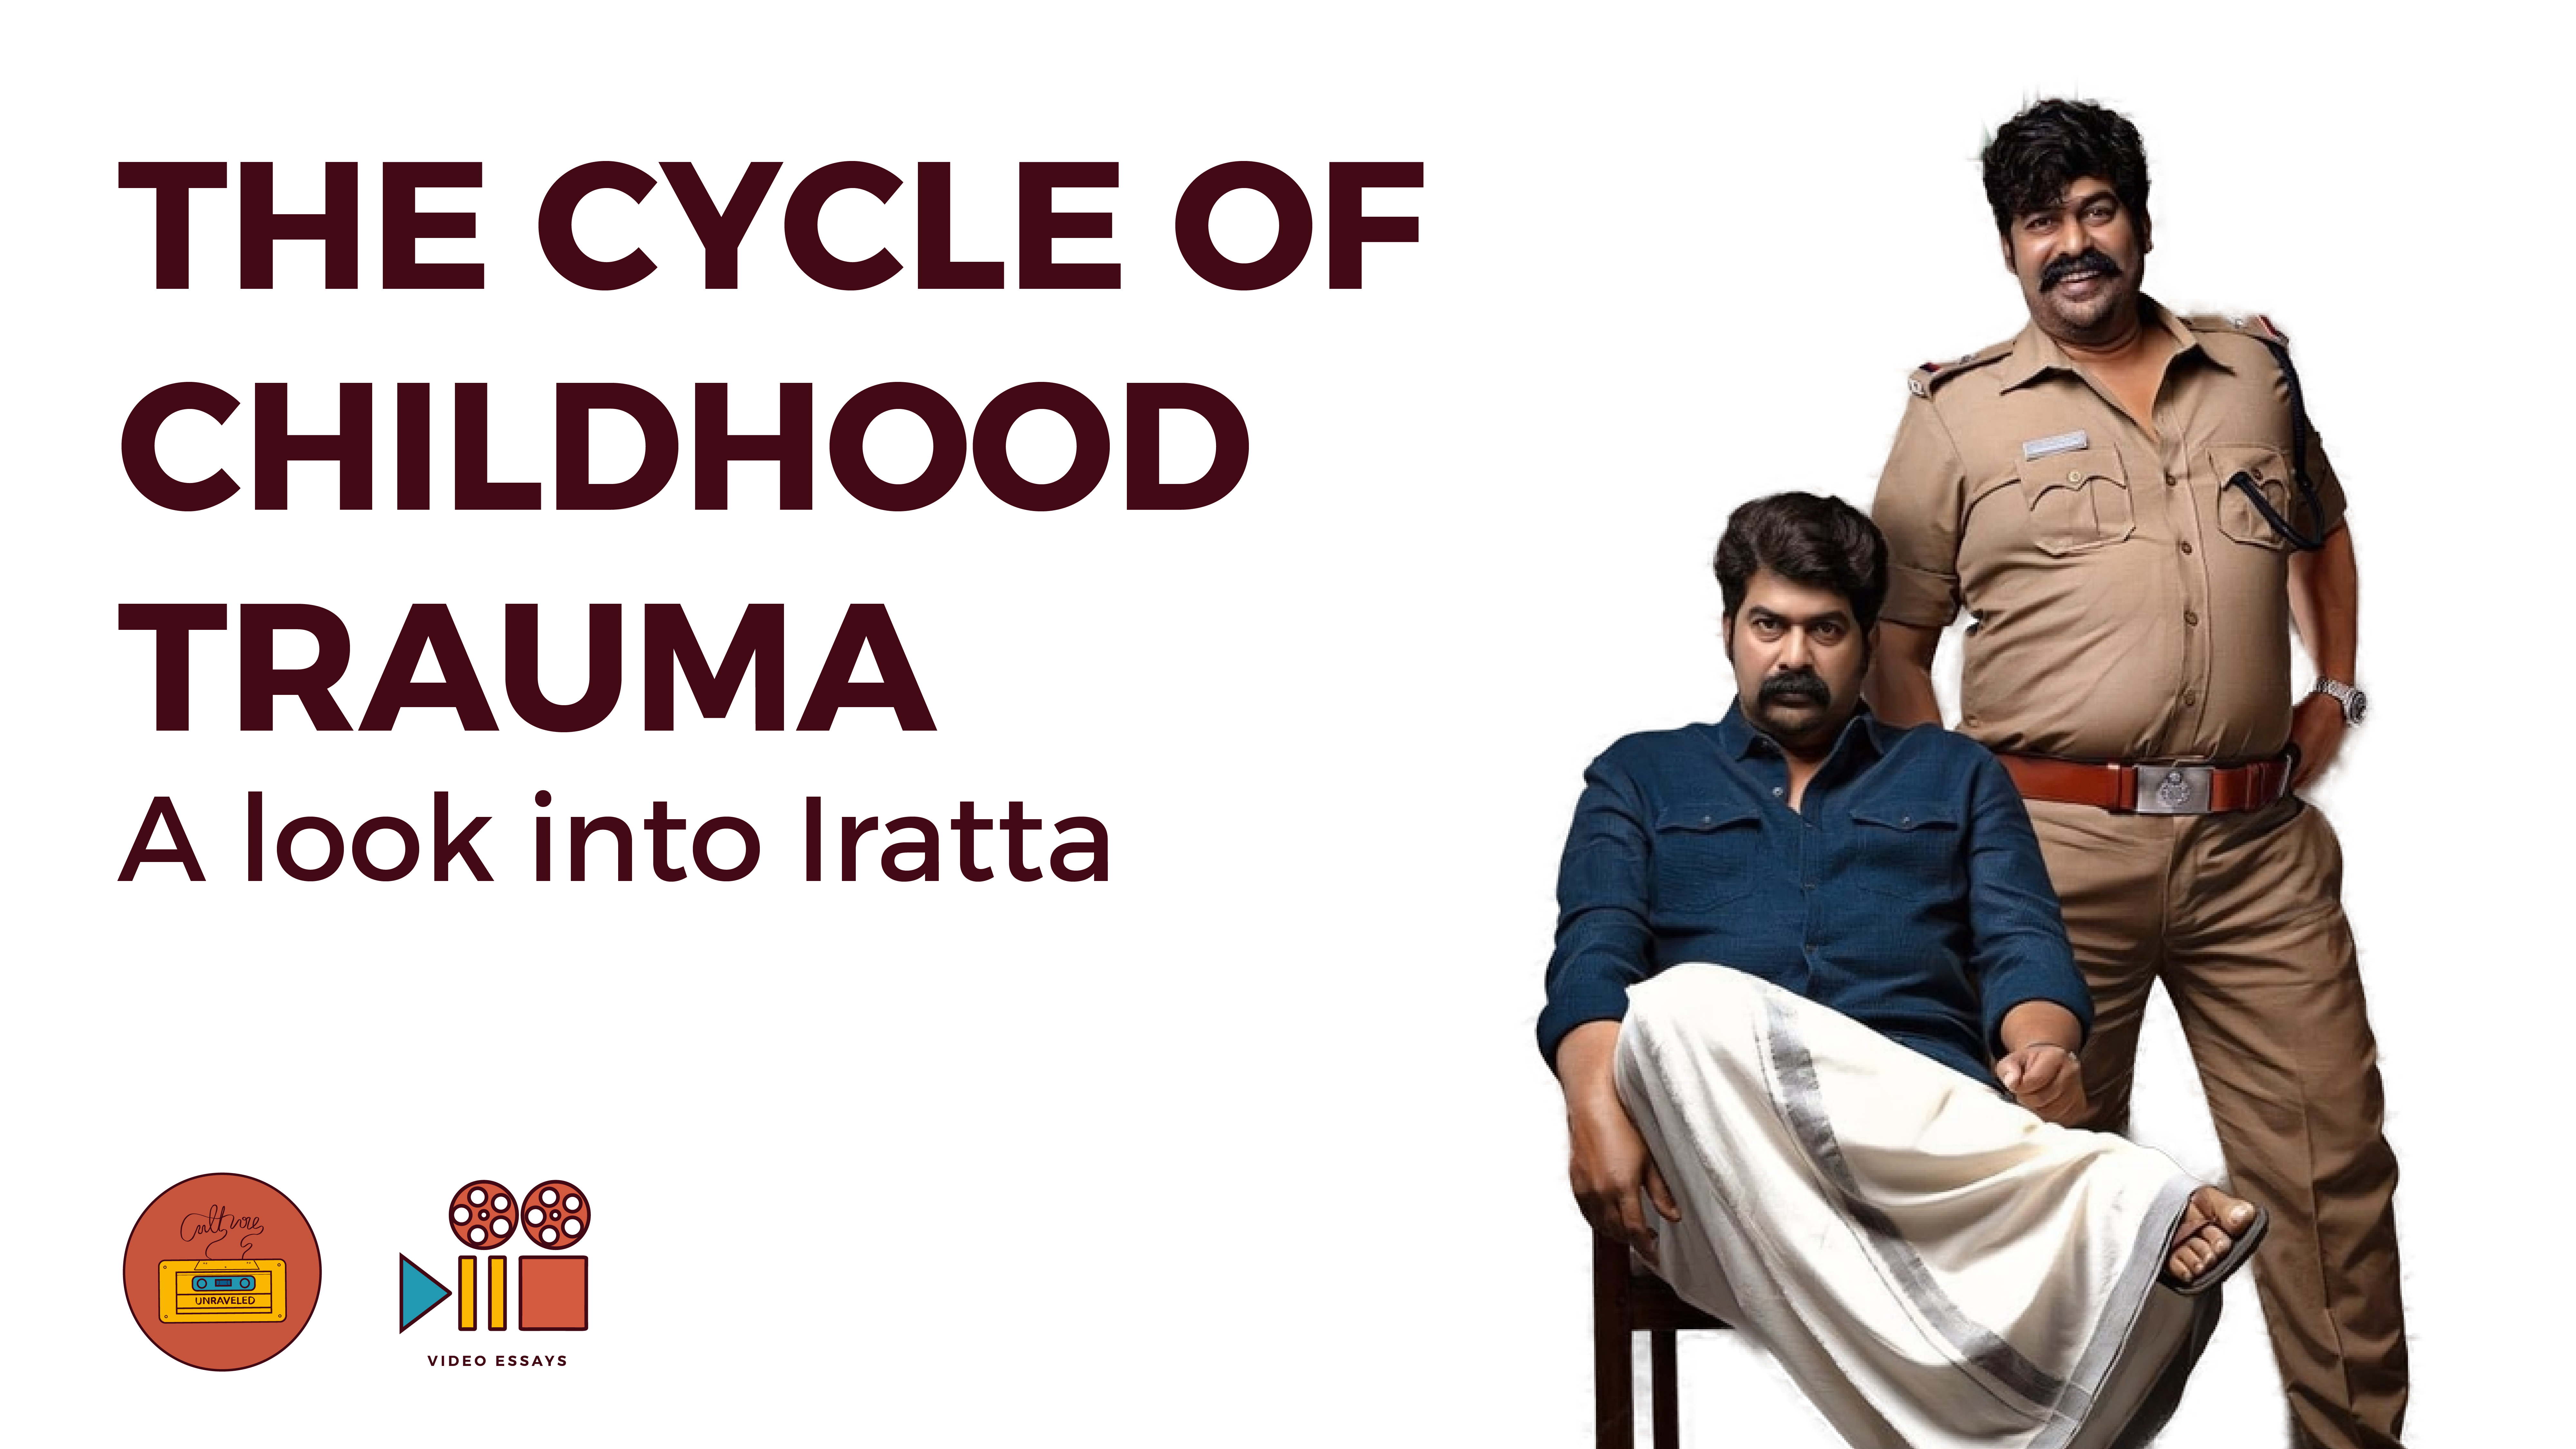 The Cycle of Childhood Trauma. A Look into Iratta